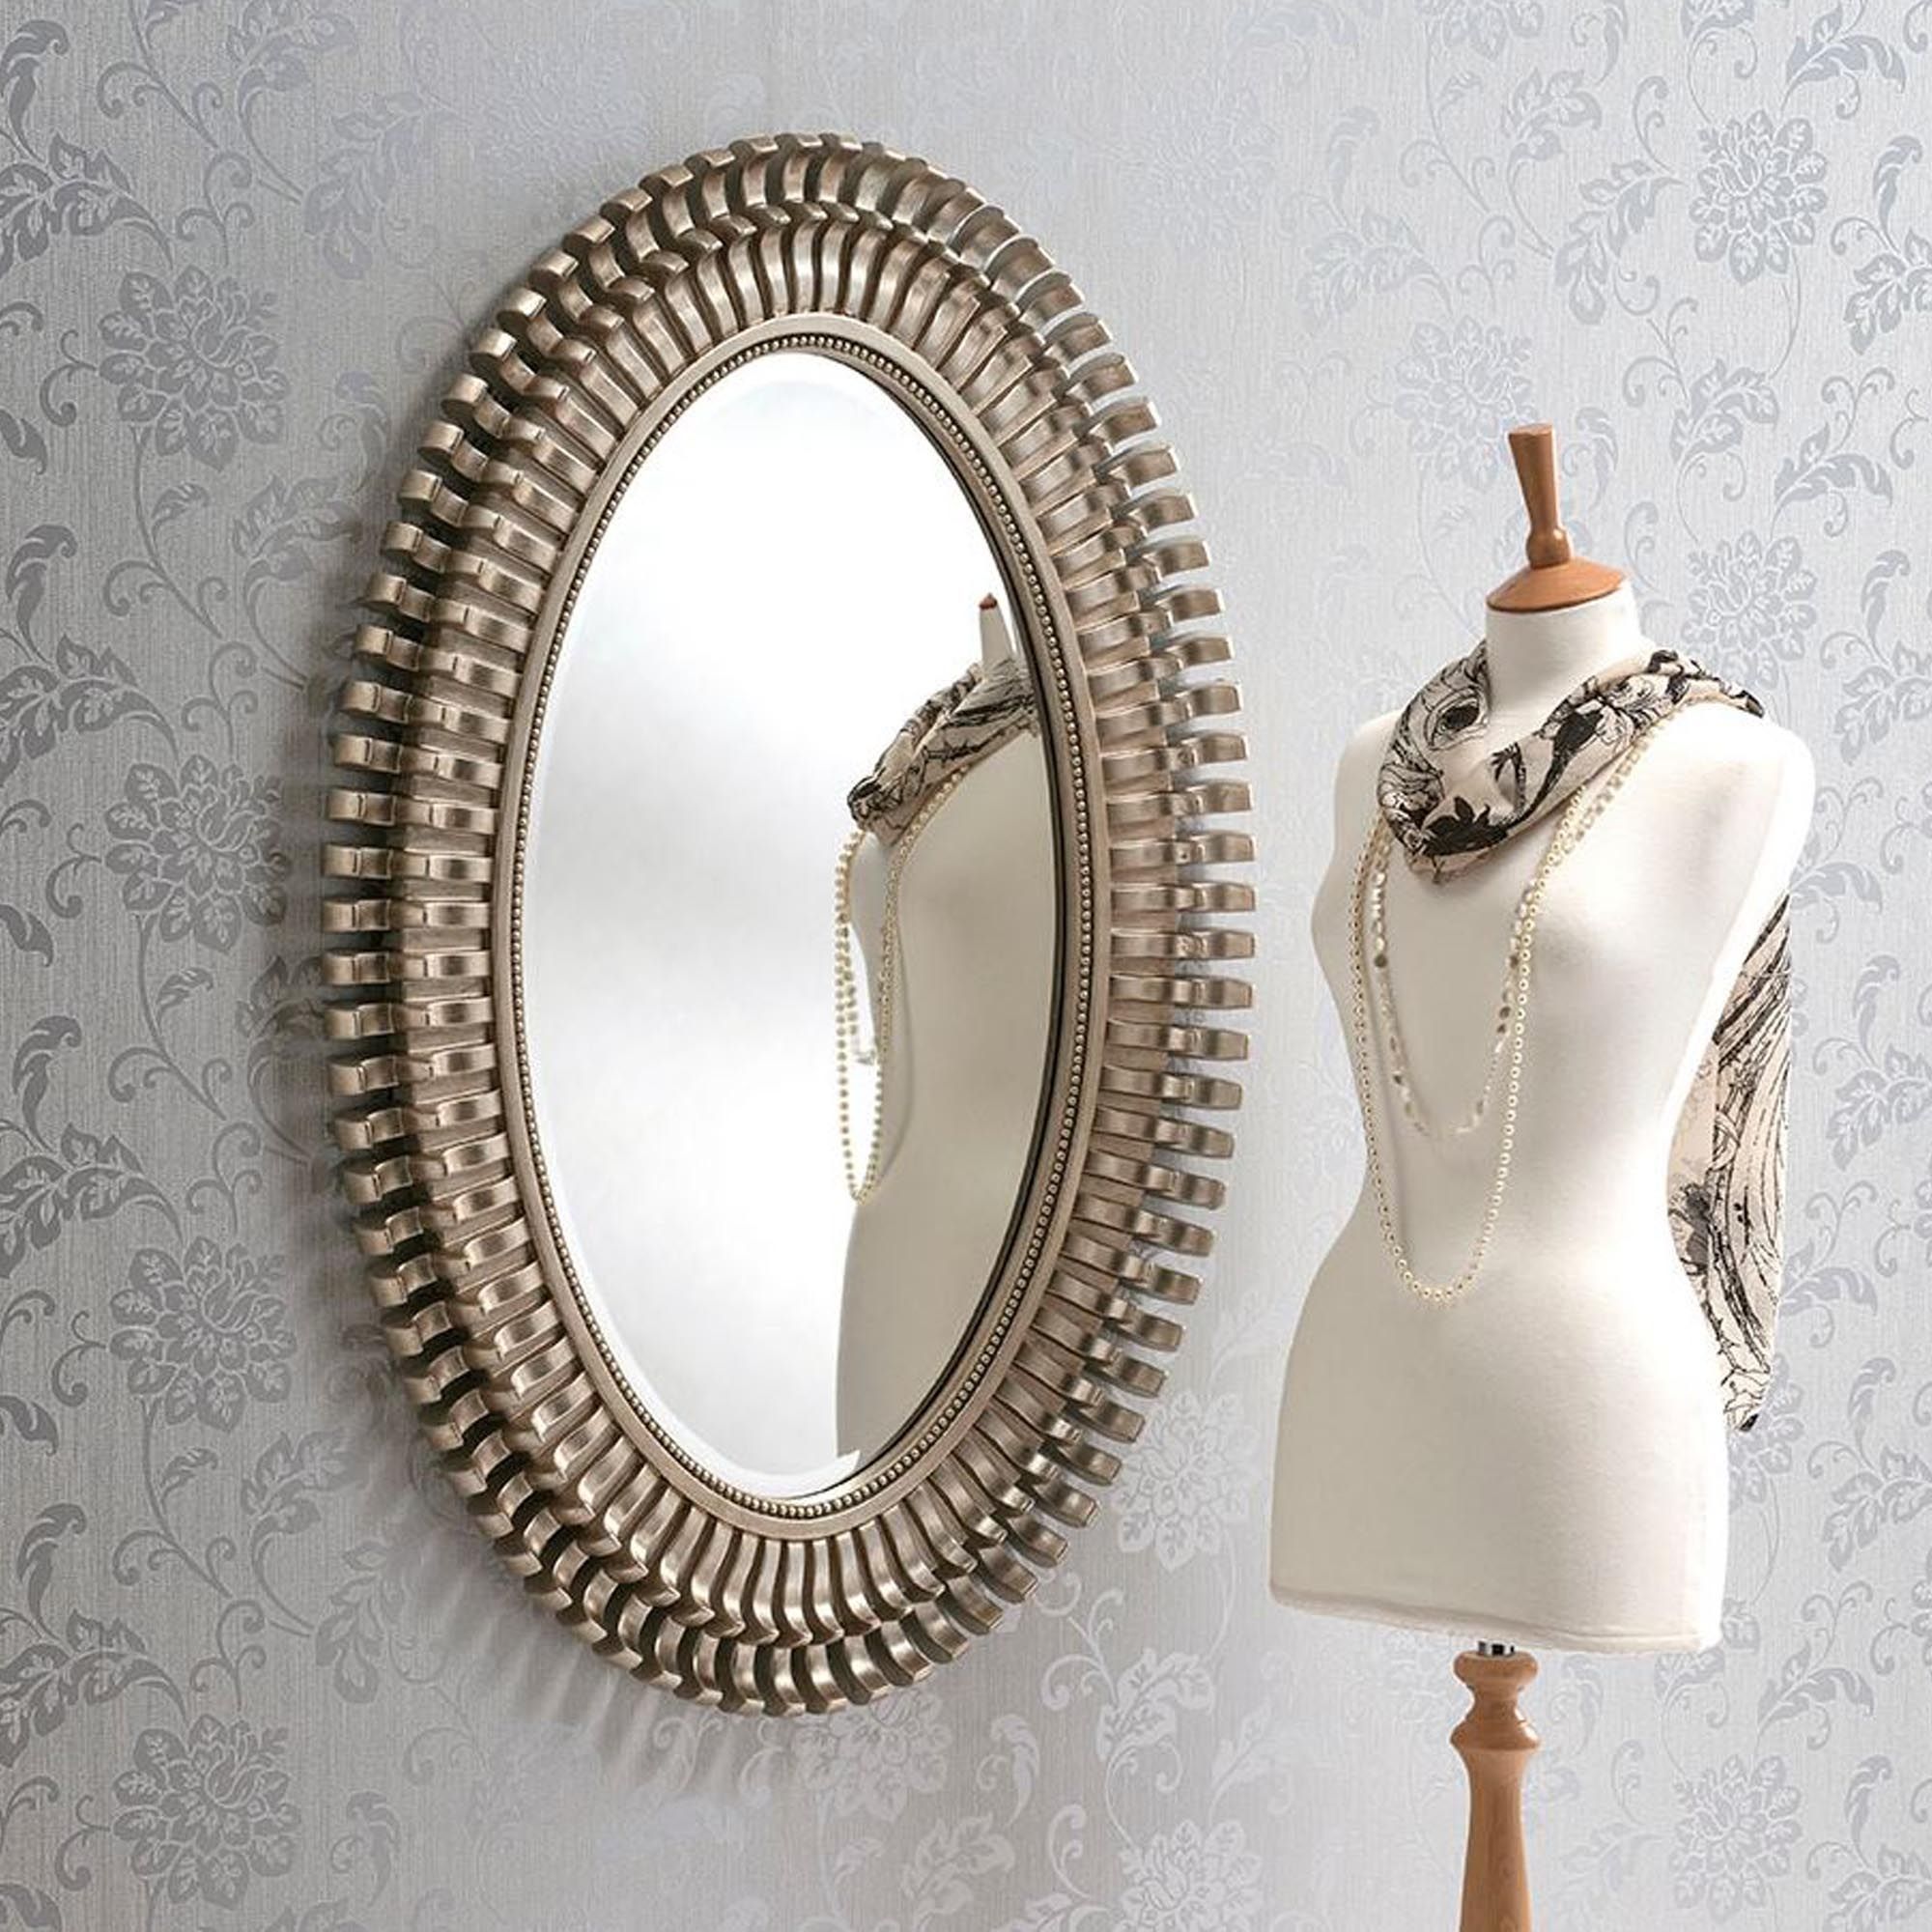 Oval Contemporary Antique Silver Wall Mirror | Homesdirect365 With Regard To Wall Mirrors (View 12 of 15)